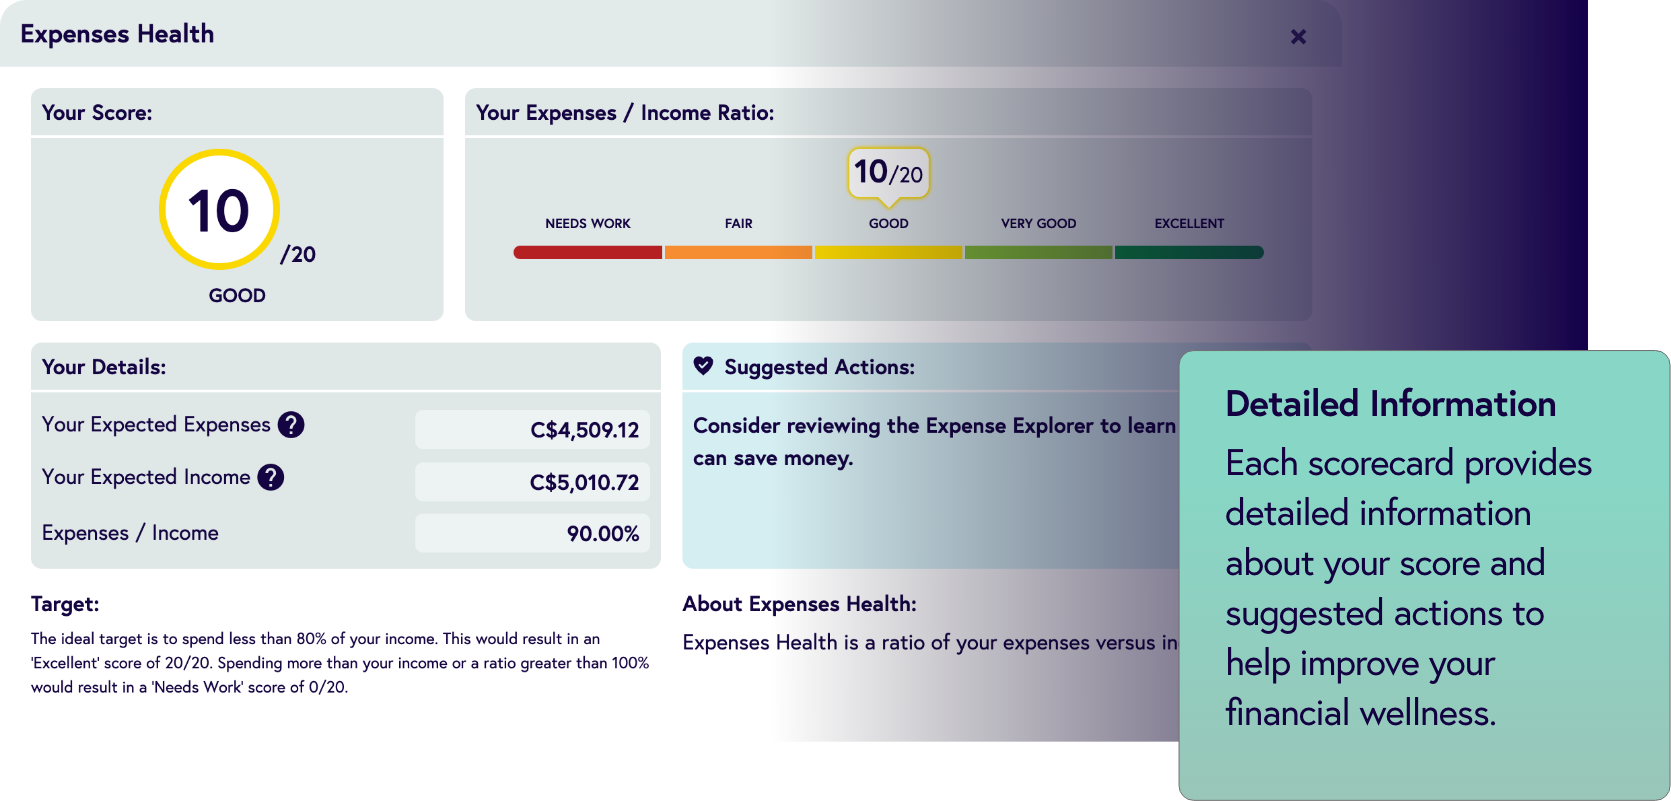 Detailed Information: Each scorecard provides detailed information about your score and suggested actions to help improve your financial wellness